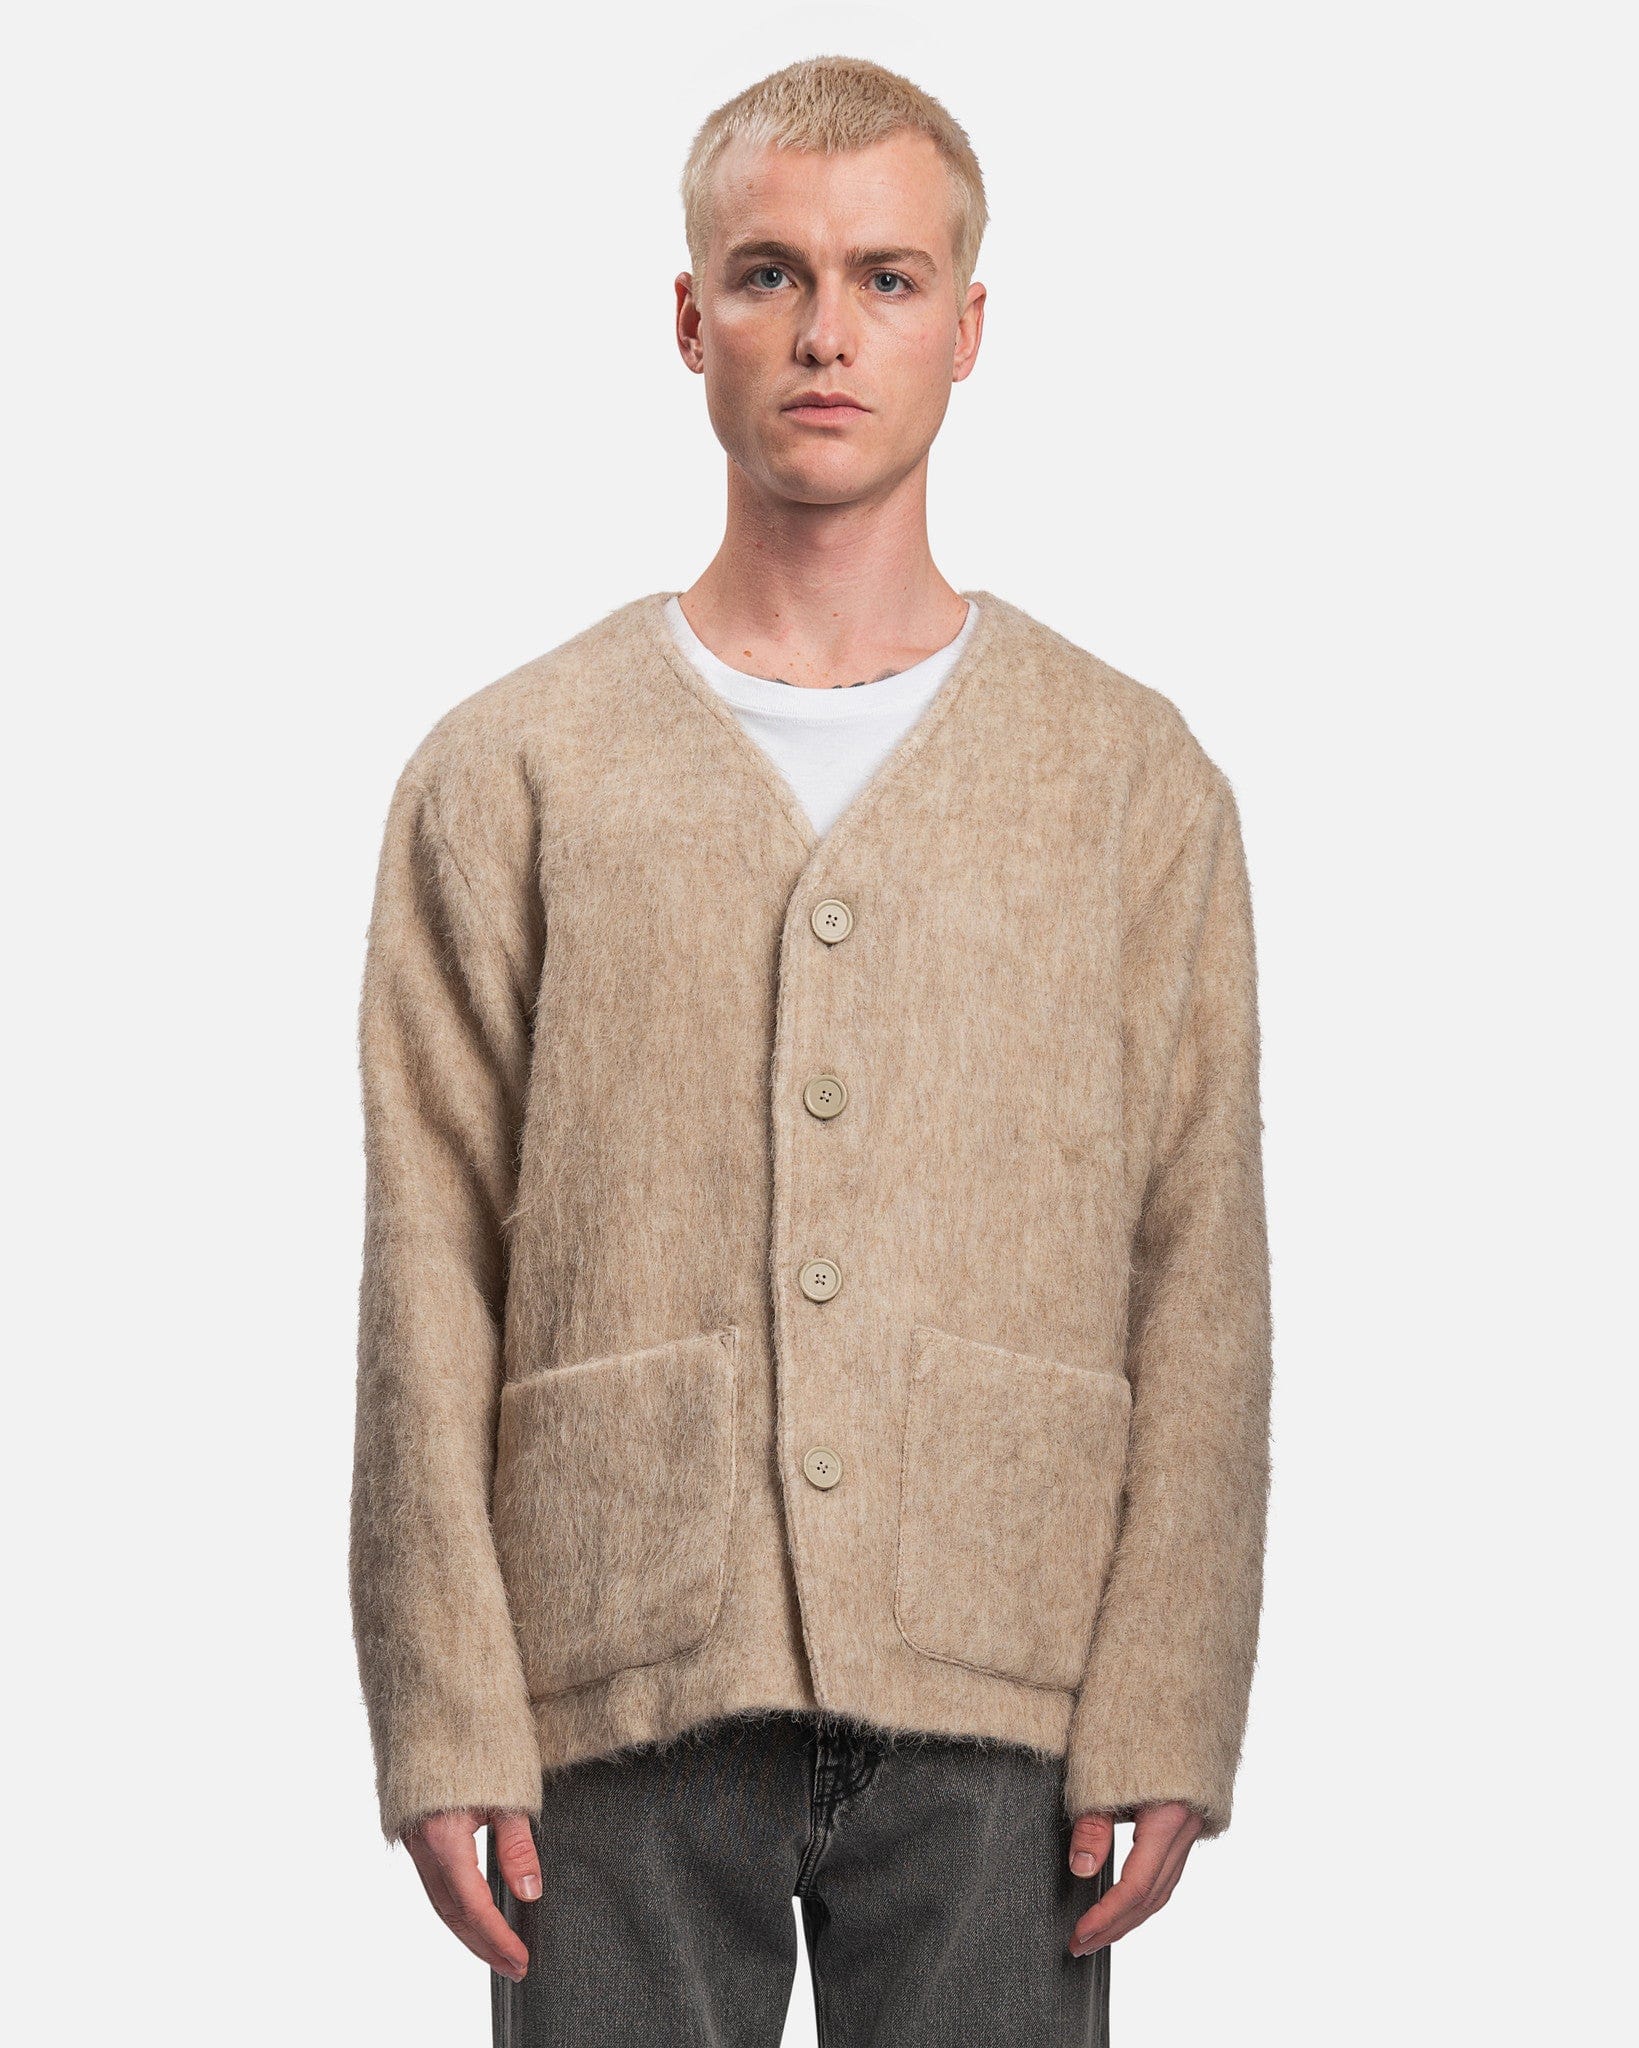 OUR LEGACY CARDIGAN ANTIQUE WHITE MOHAIR